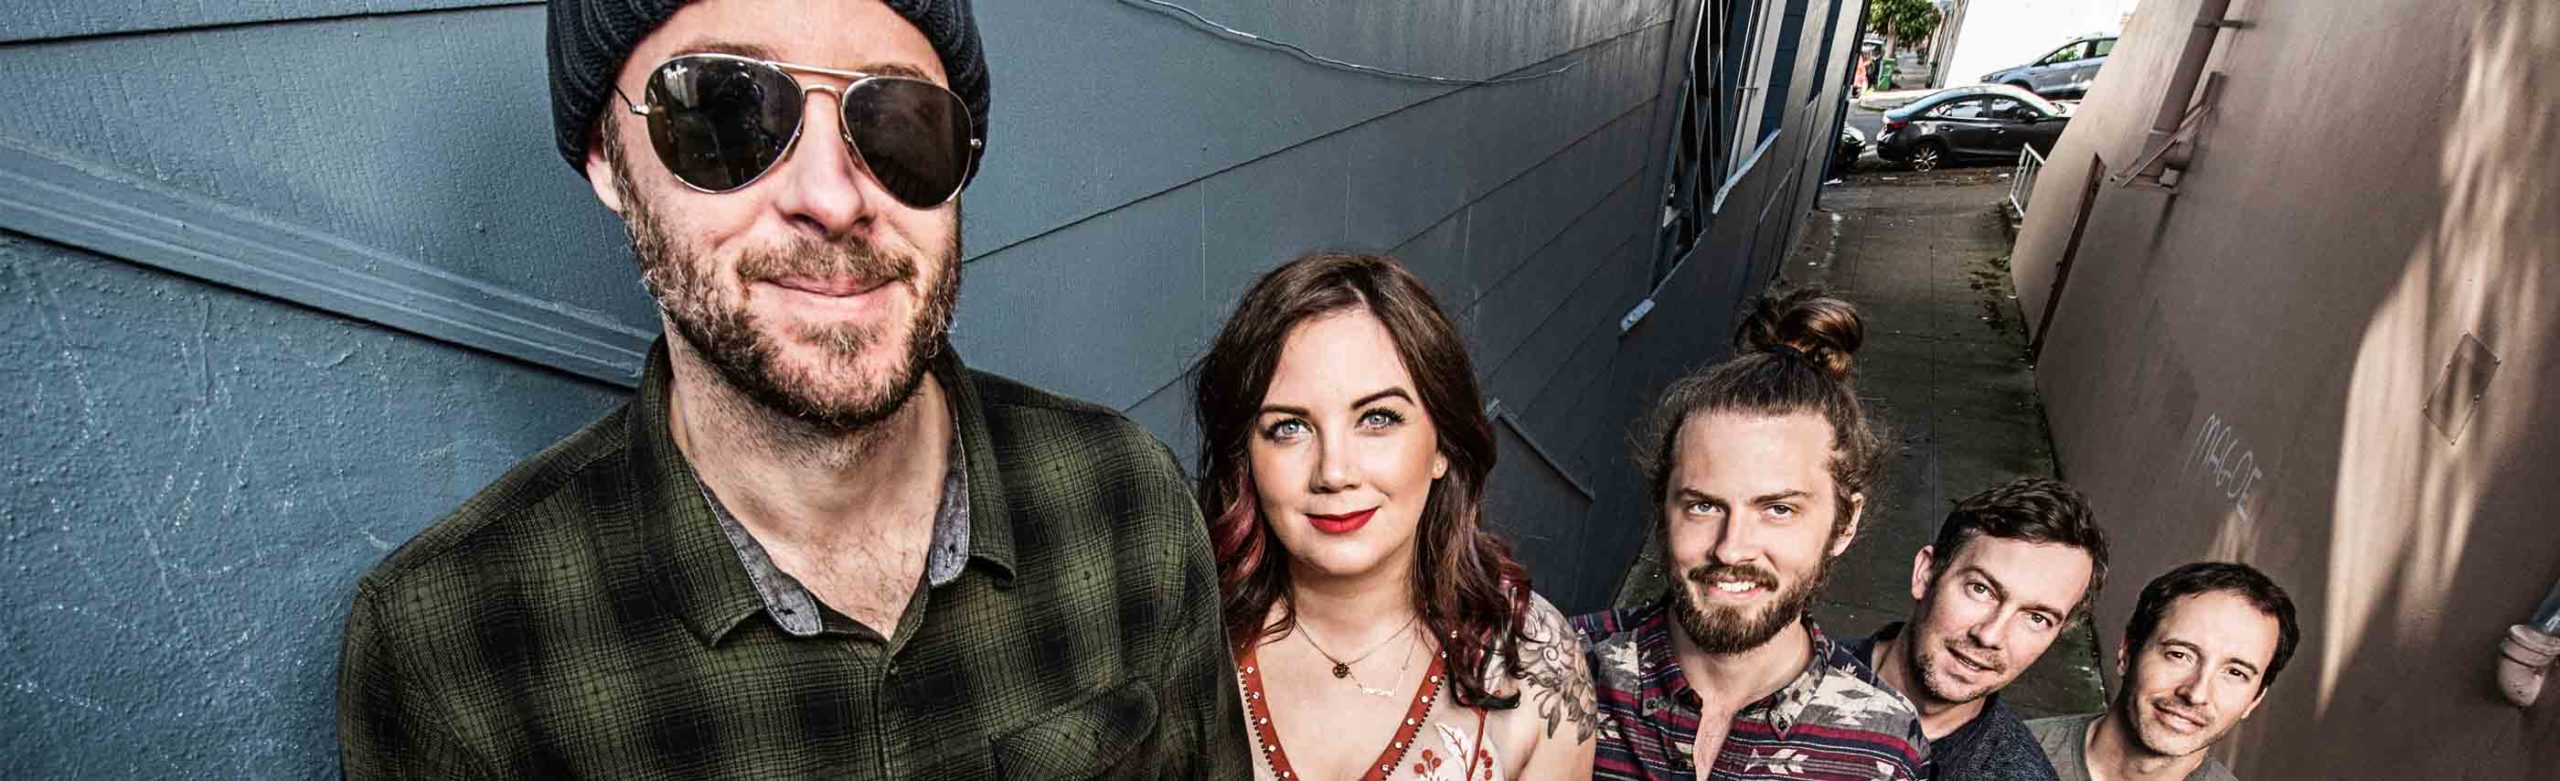 Jammin’ Through the Years: A Night with Yonder Mountain String Band Image